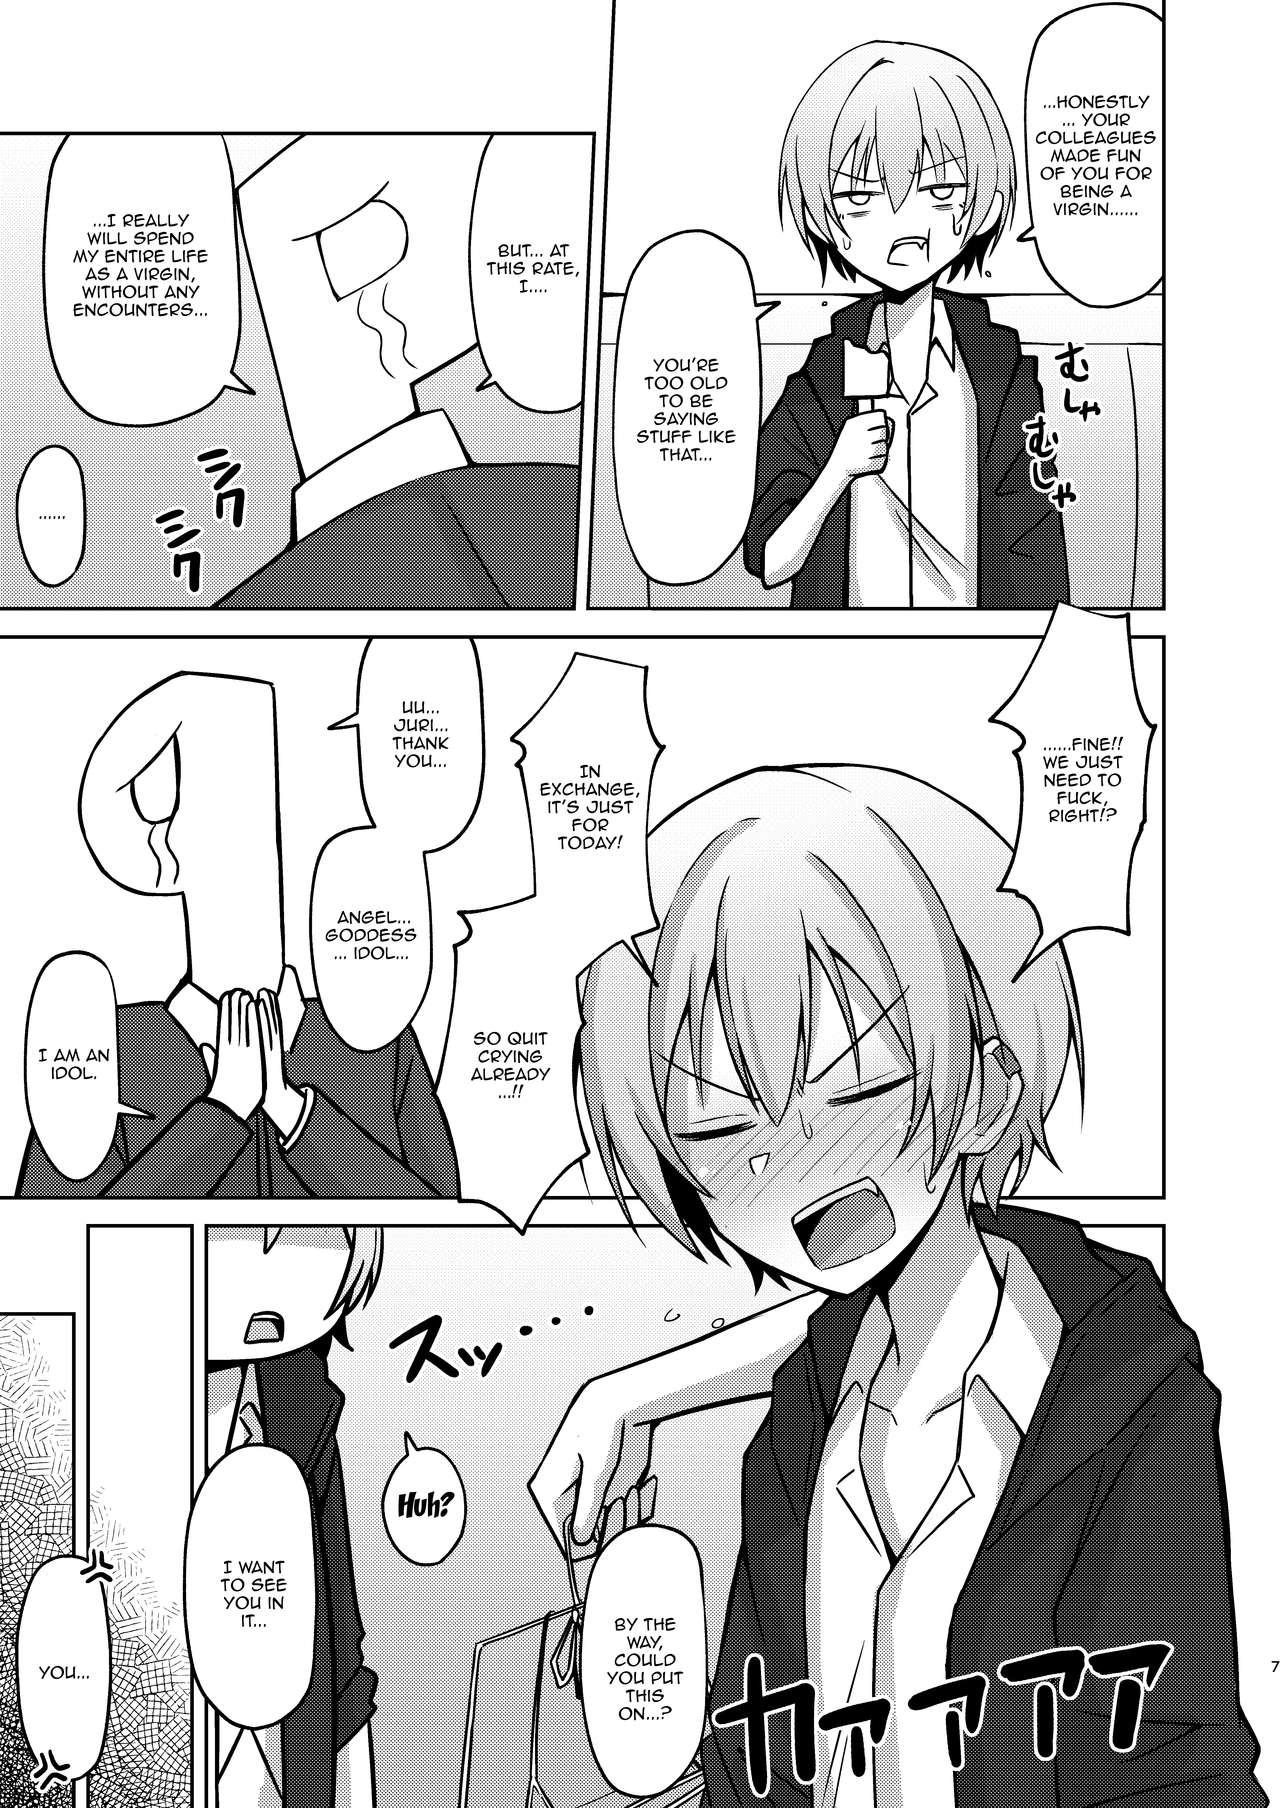 Kissing H nante Zettee Yannee kara na!! | There's No Way I'll Do Anything Lewd!! - The idolmaster Staxxx - Page 4